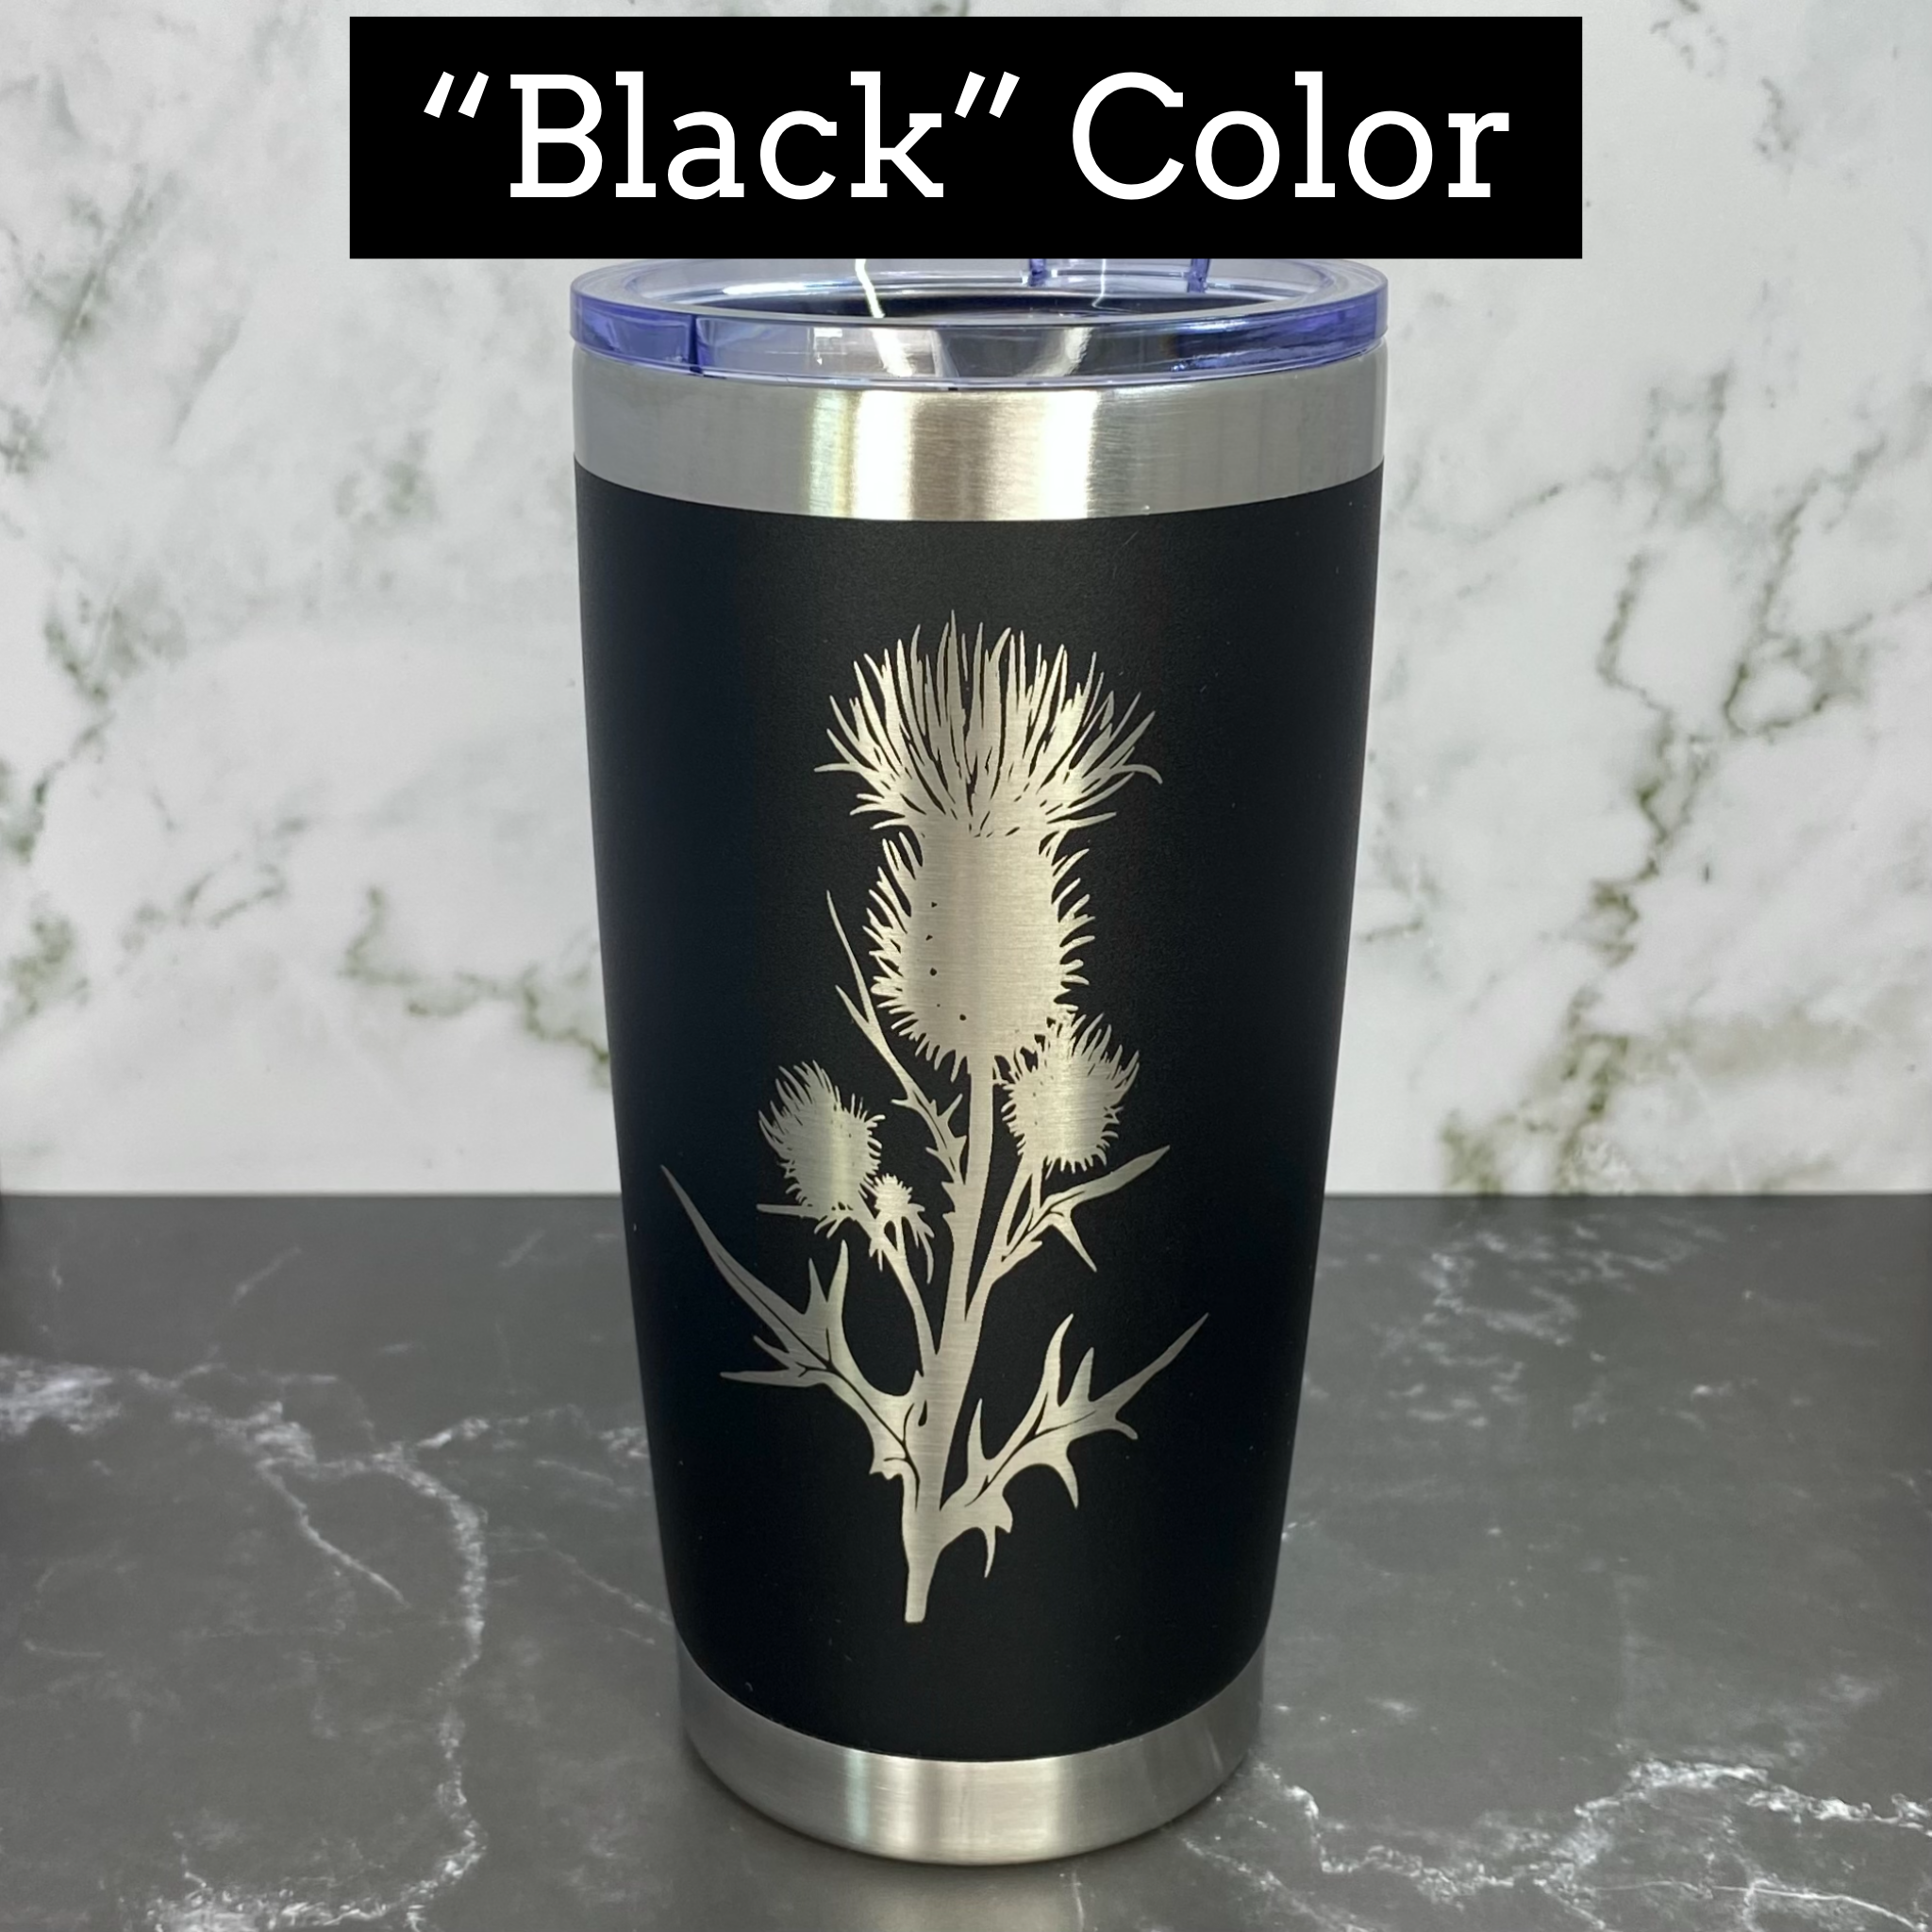 Highland Cow with Flowers 20 oz insulated tumbler with lid and straw